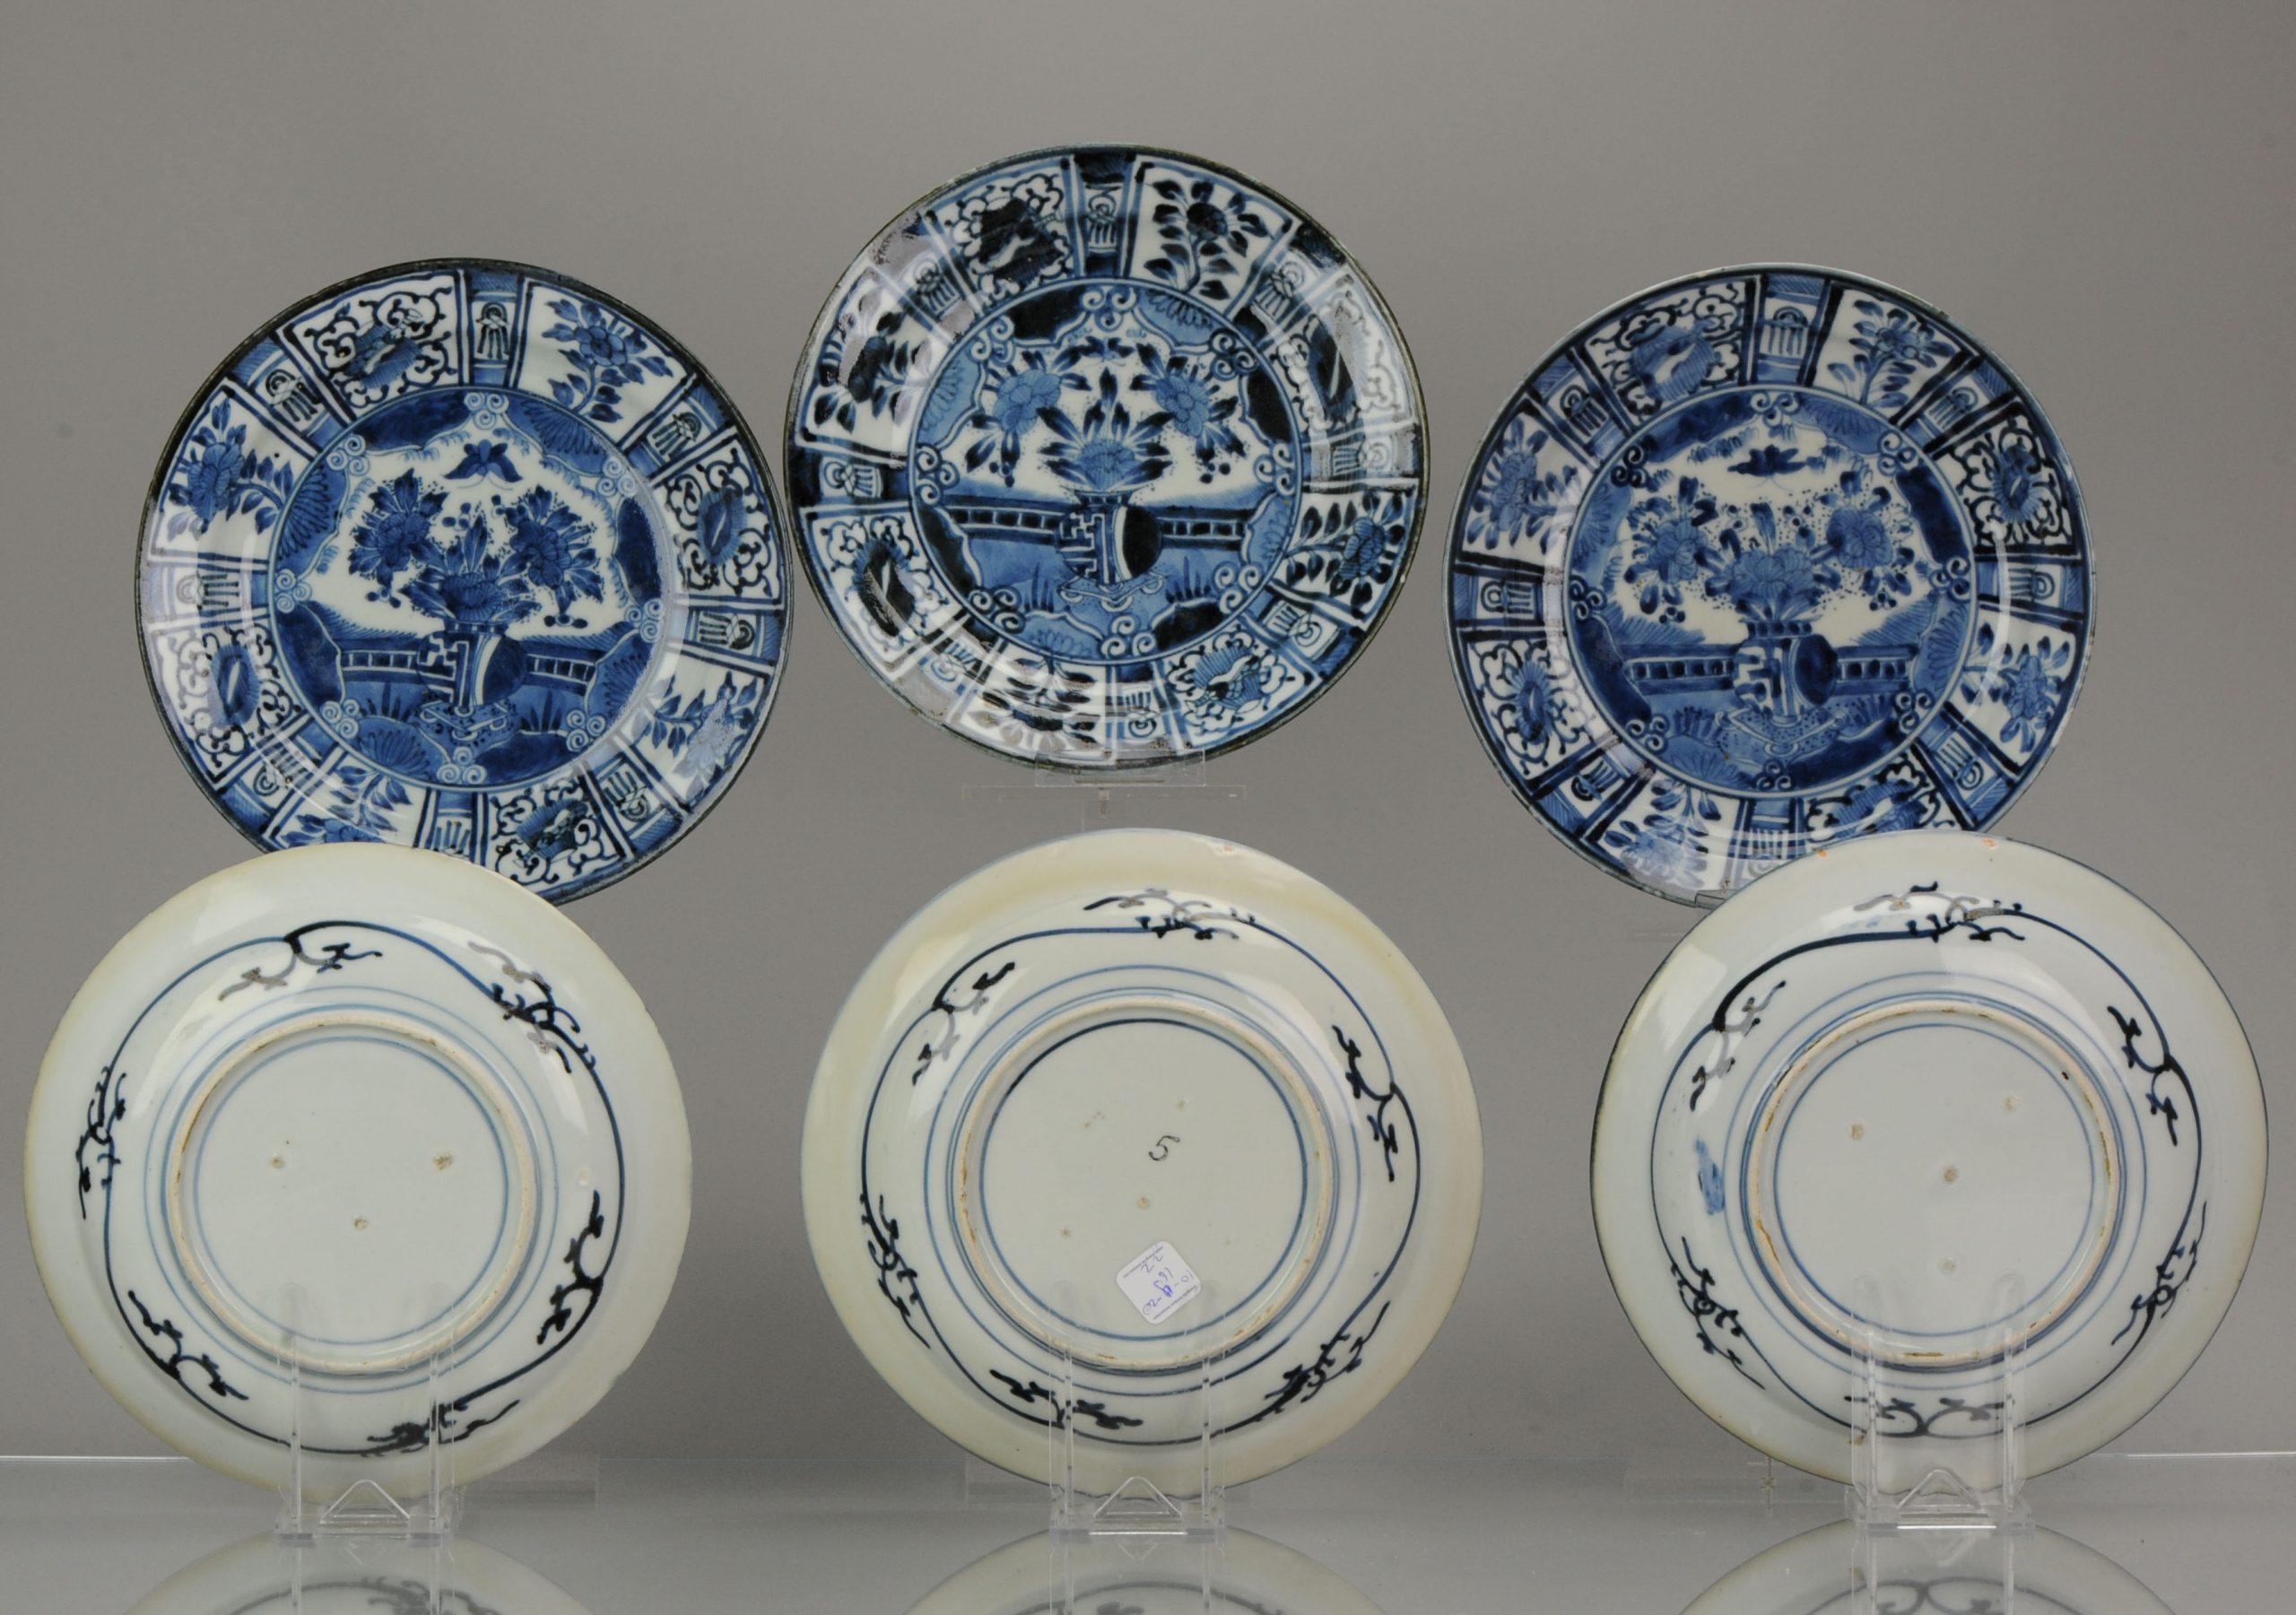 #6 Antique Japanese Porcelain 1680-1710 Edo Period Kraak Dinner Plates In Excellent Condition For Sale In Amsterdam, Noord Holland